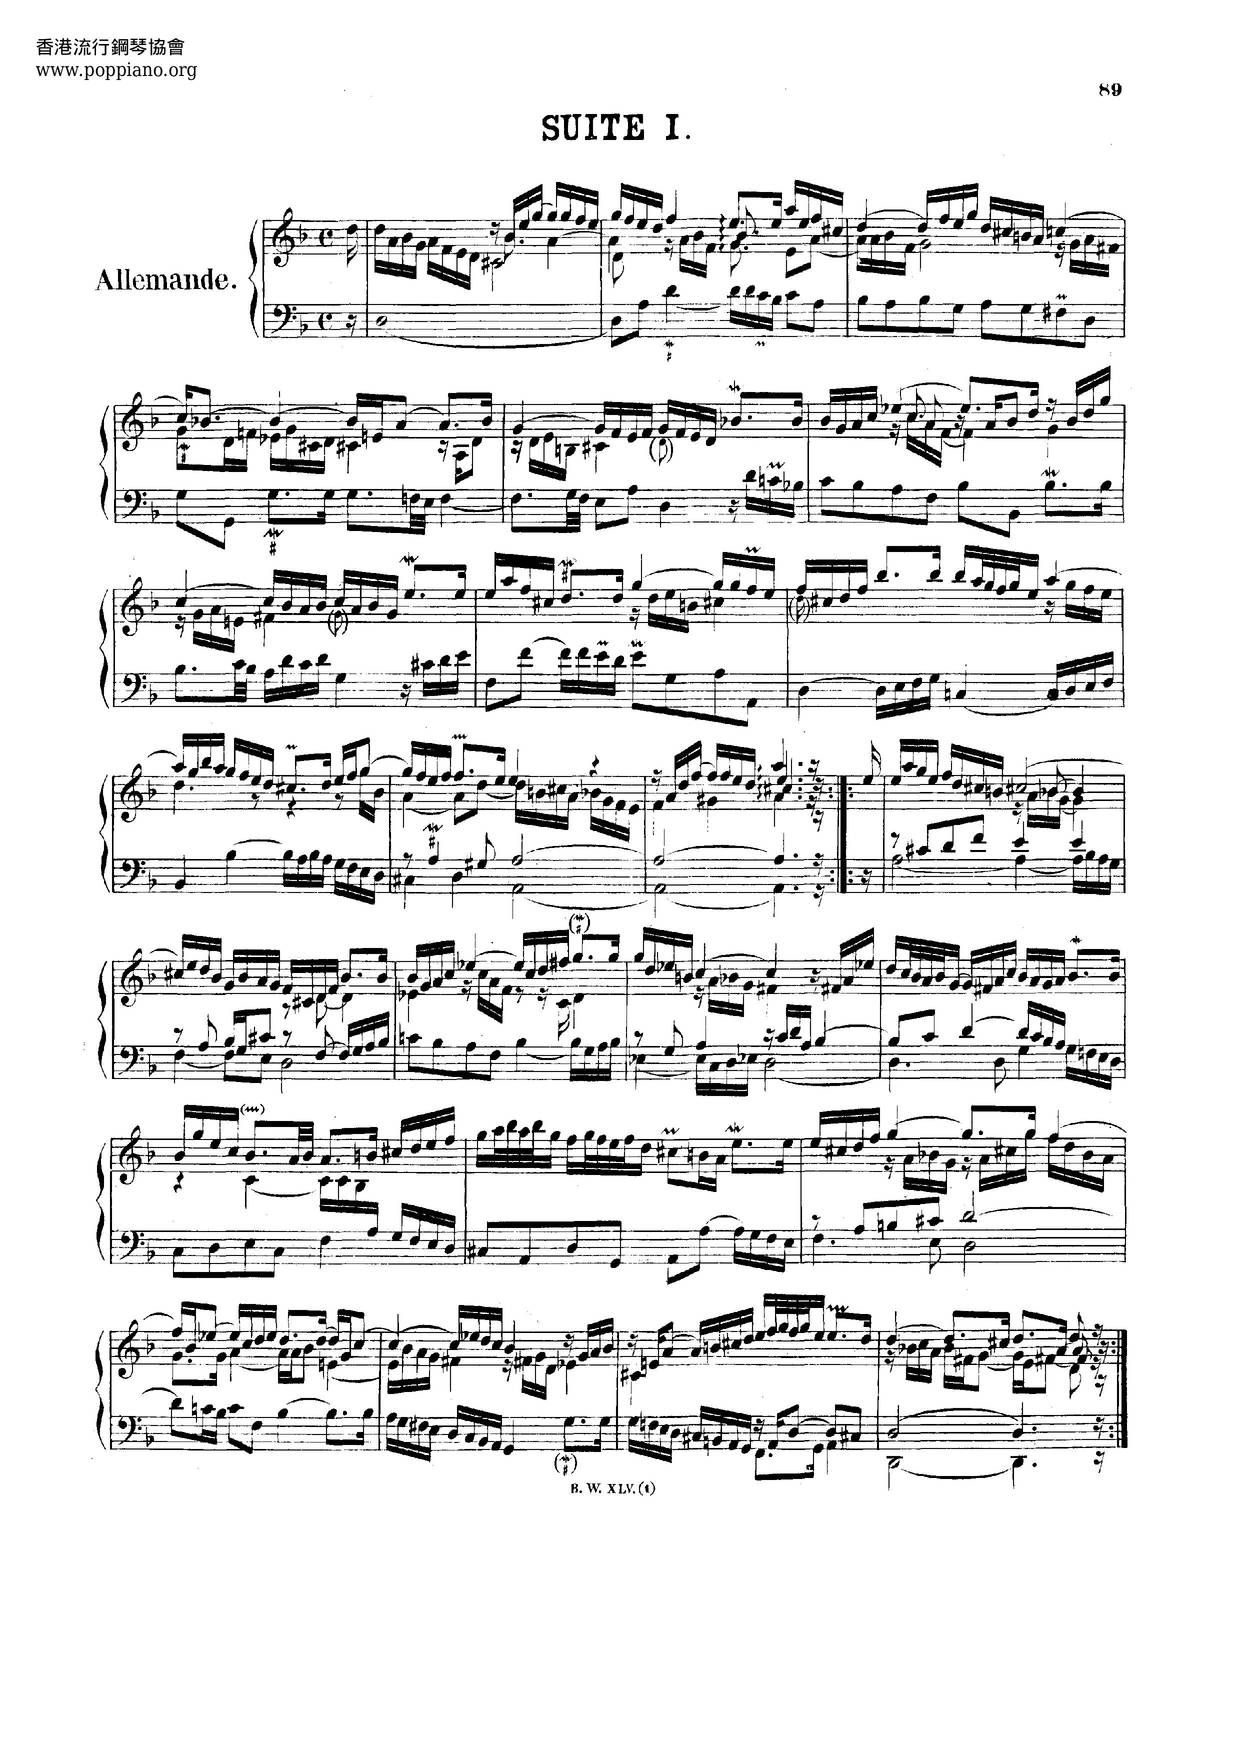 French Suite No. 1 In D Minor, BWV 812ピアノ譜